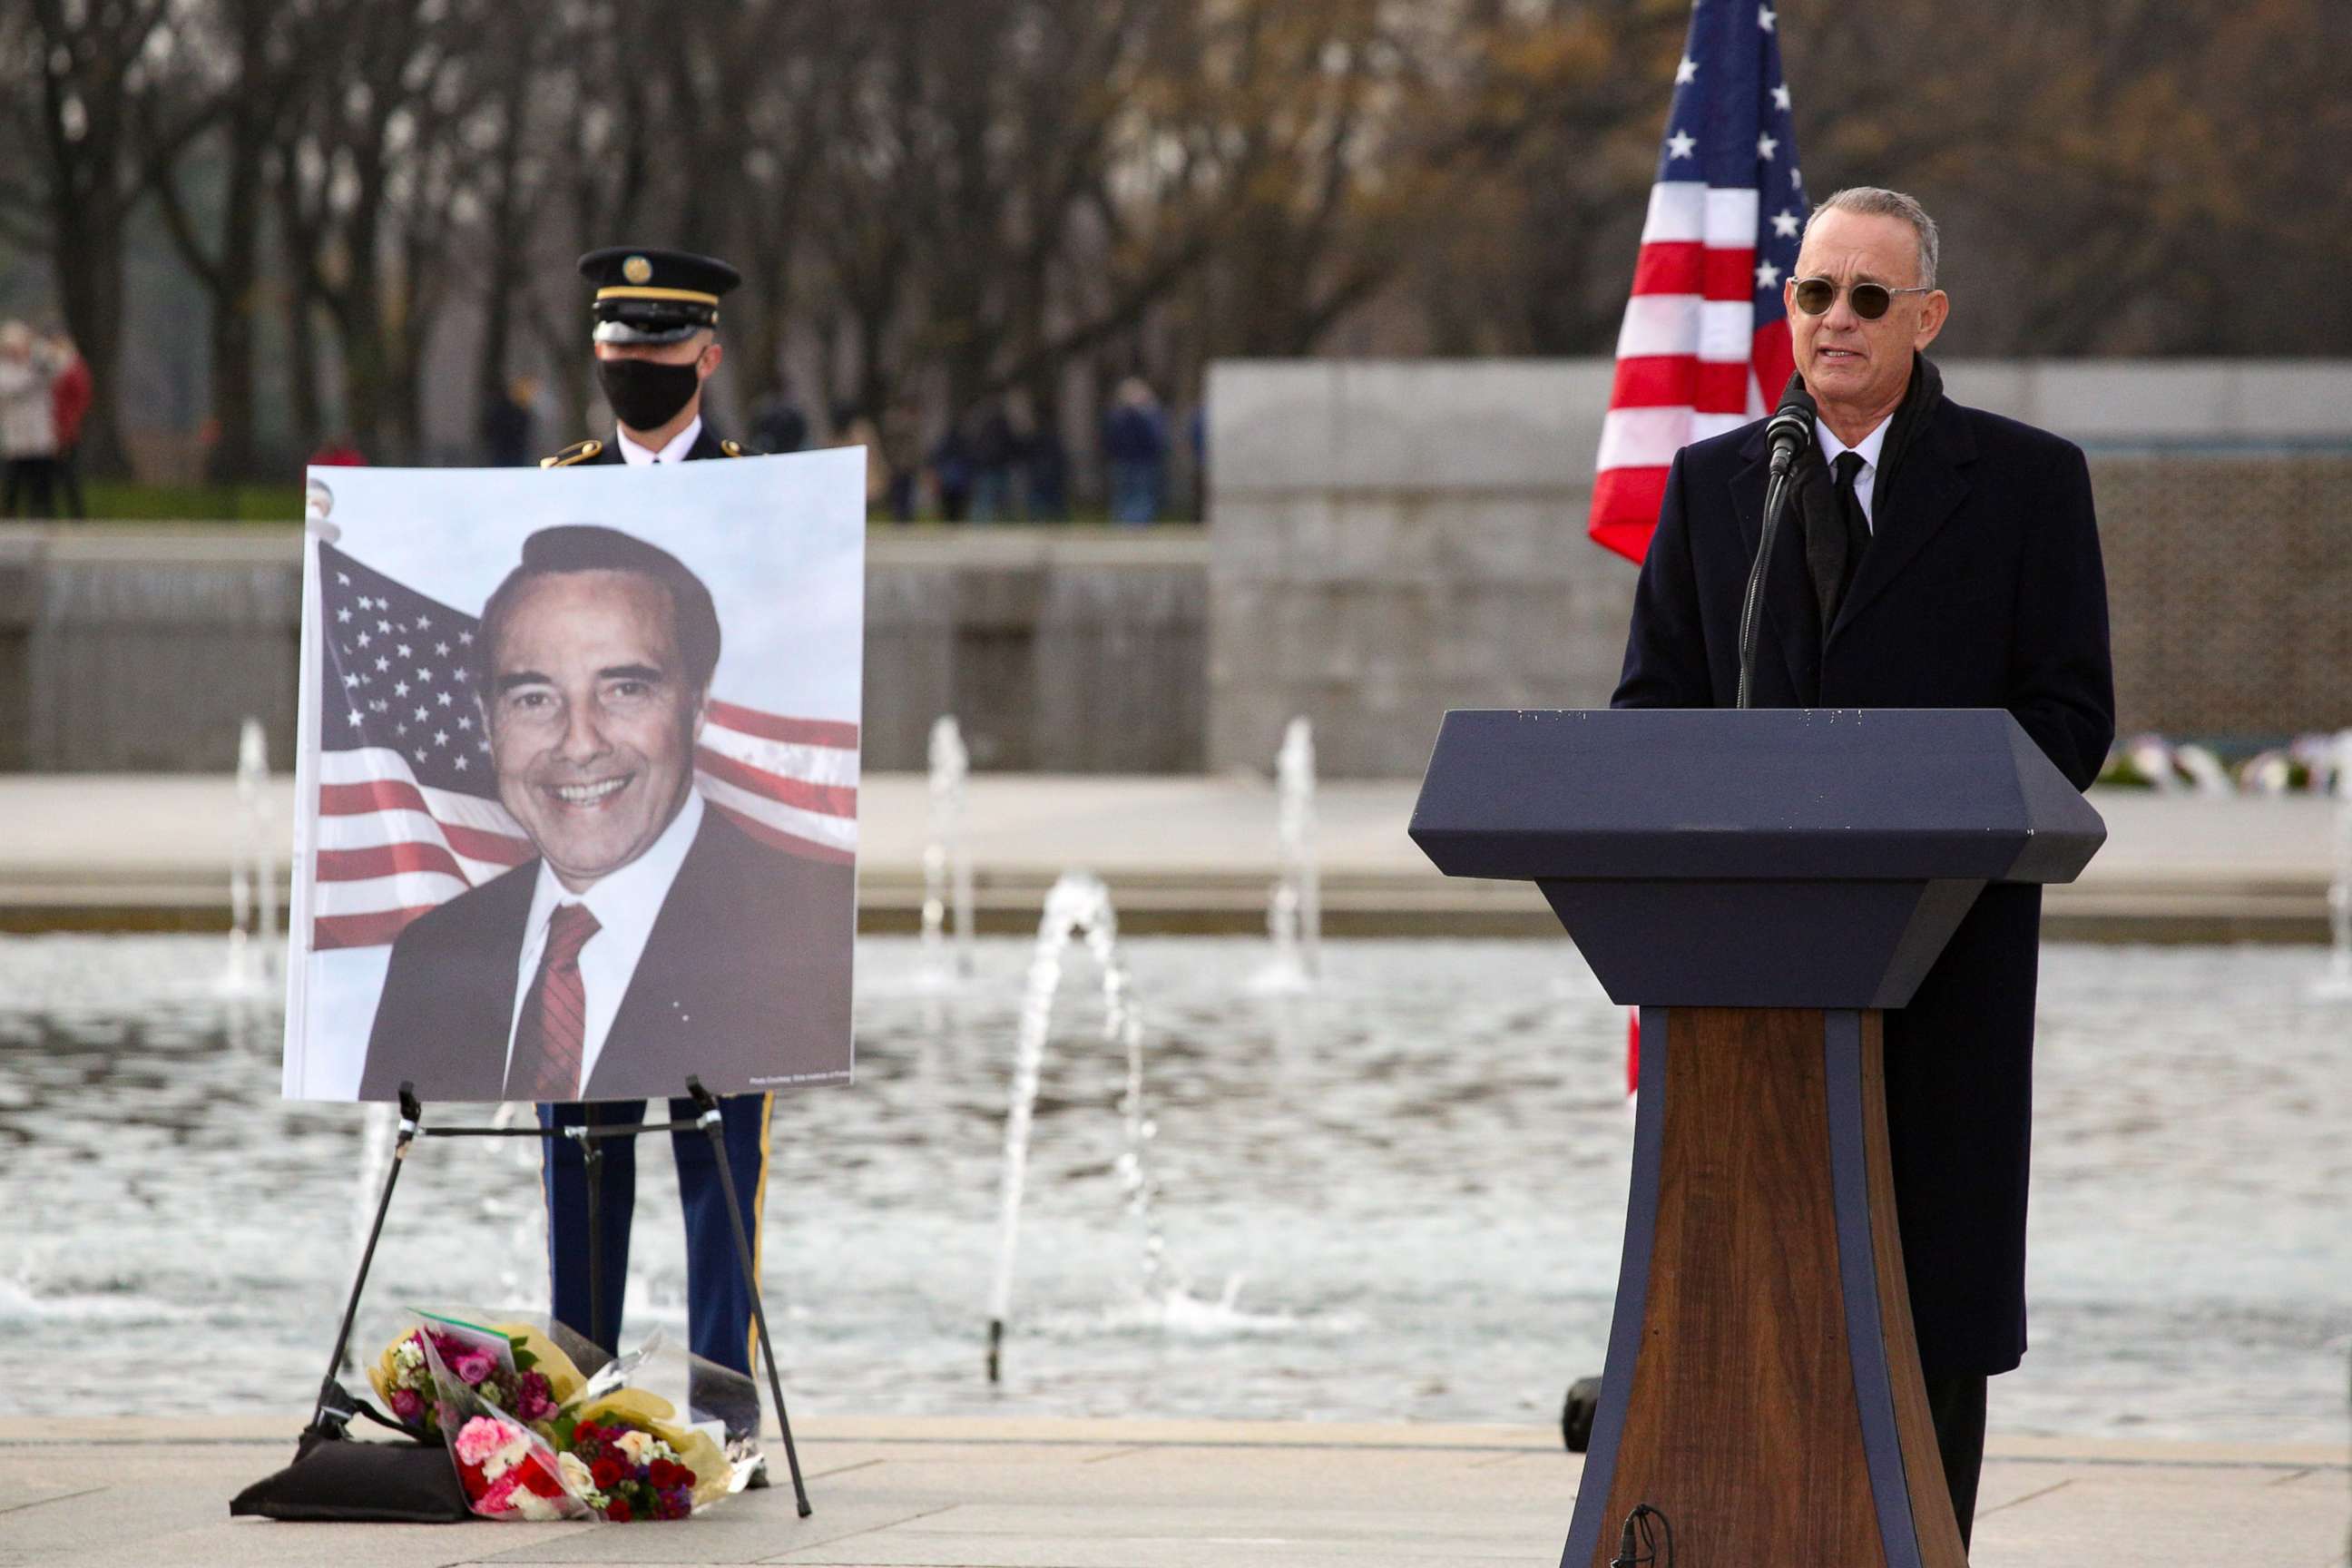 PHOTO: Actor Tom Hanks speaks at a public memorial for the late Sen. Bob Dole at the World War II Memorial in Washington, D.C., on Dec. 10, 2021.